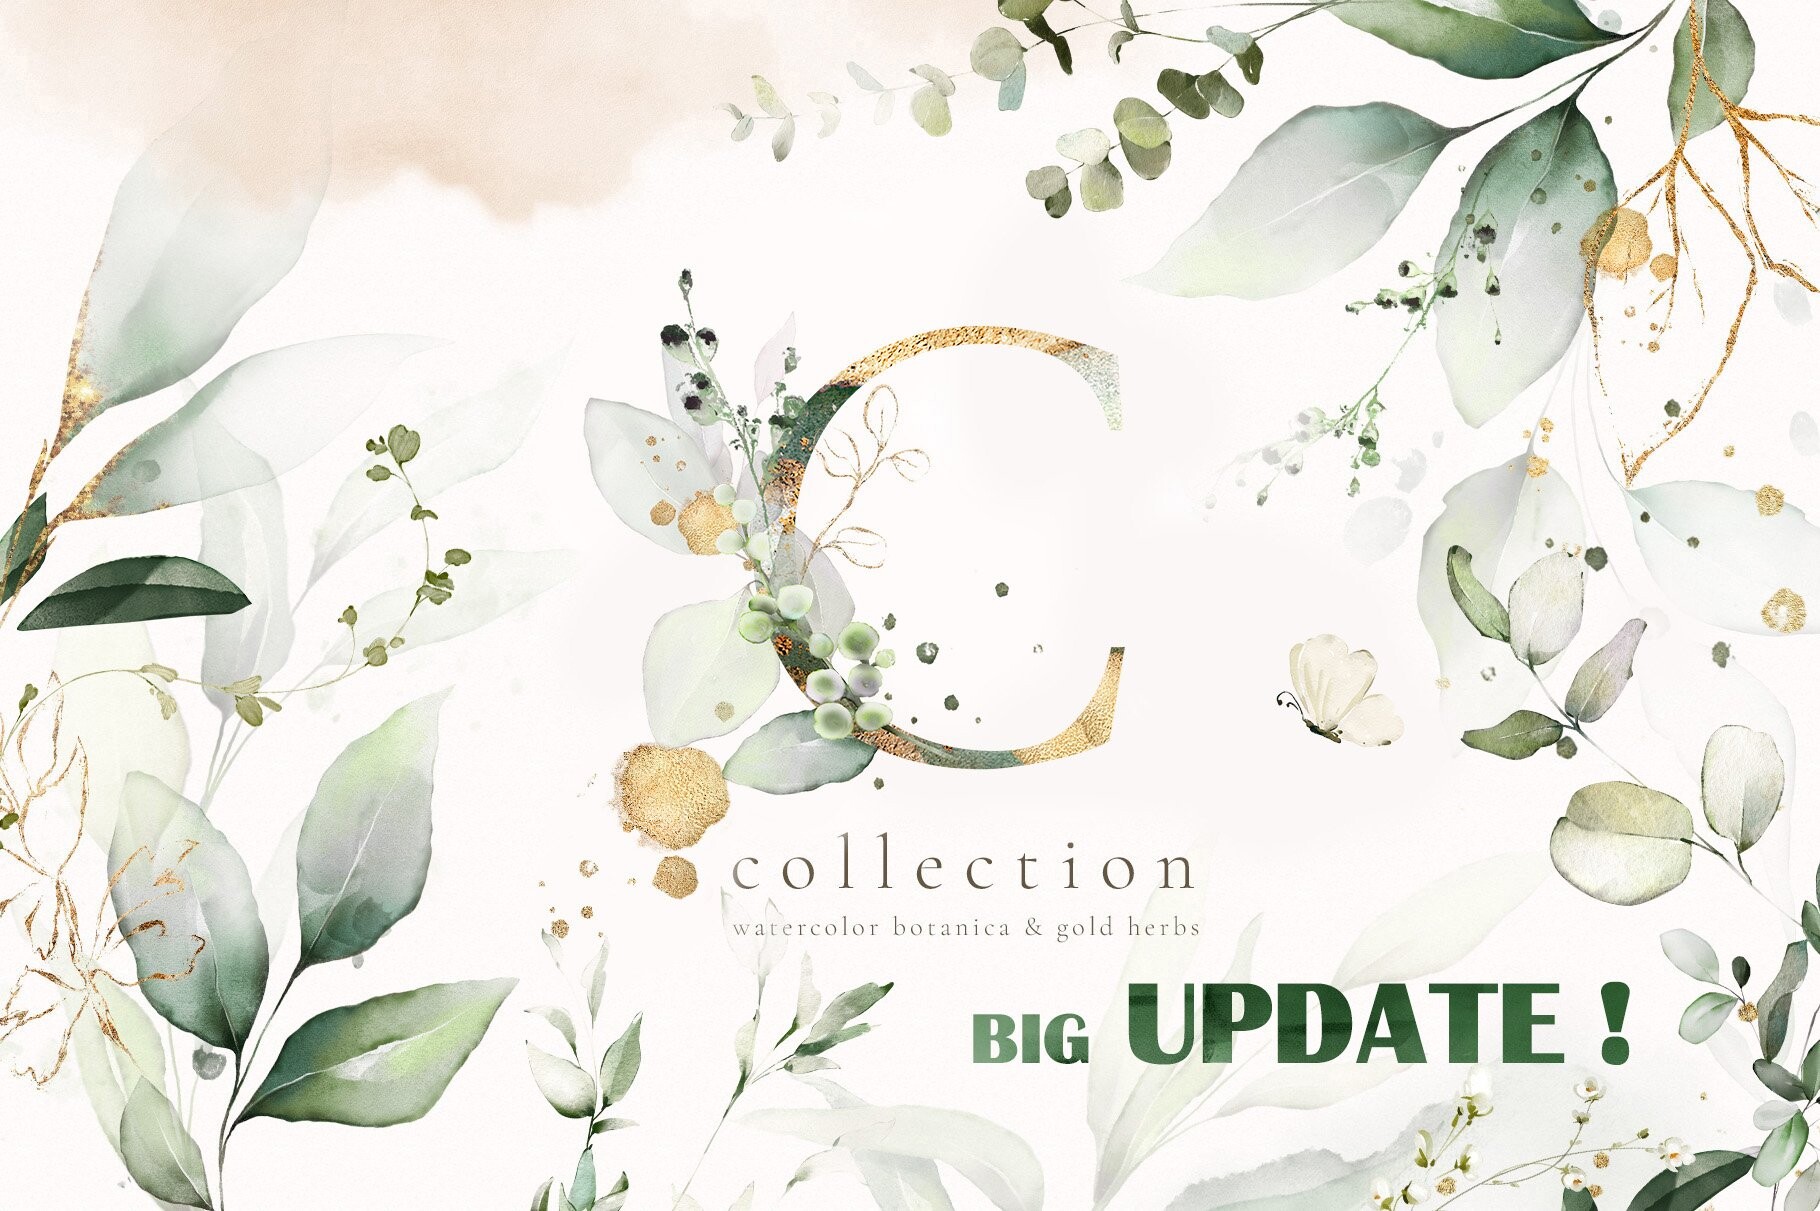 Left collection. Watercolor & Gold leaves collection by lisima. Watercolor & Gold leaves collection.